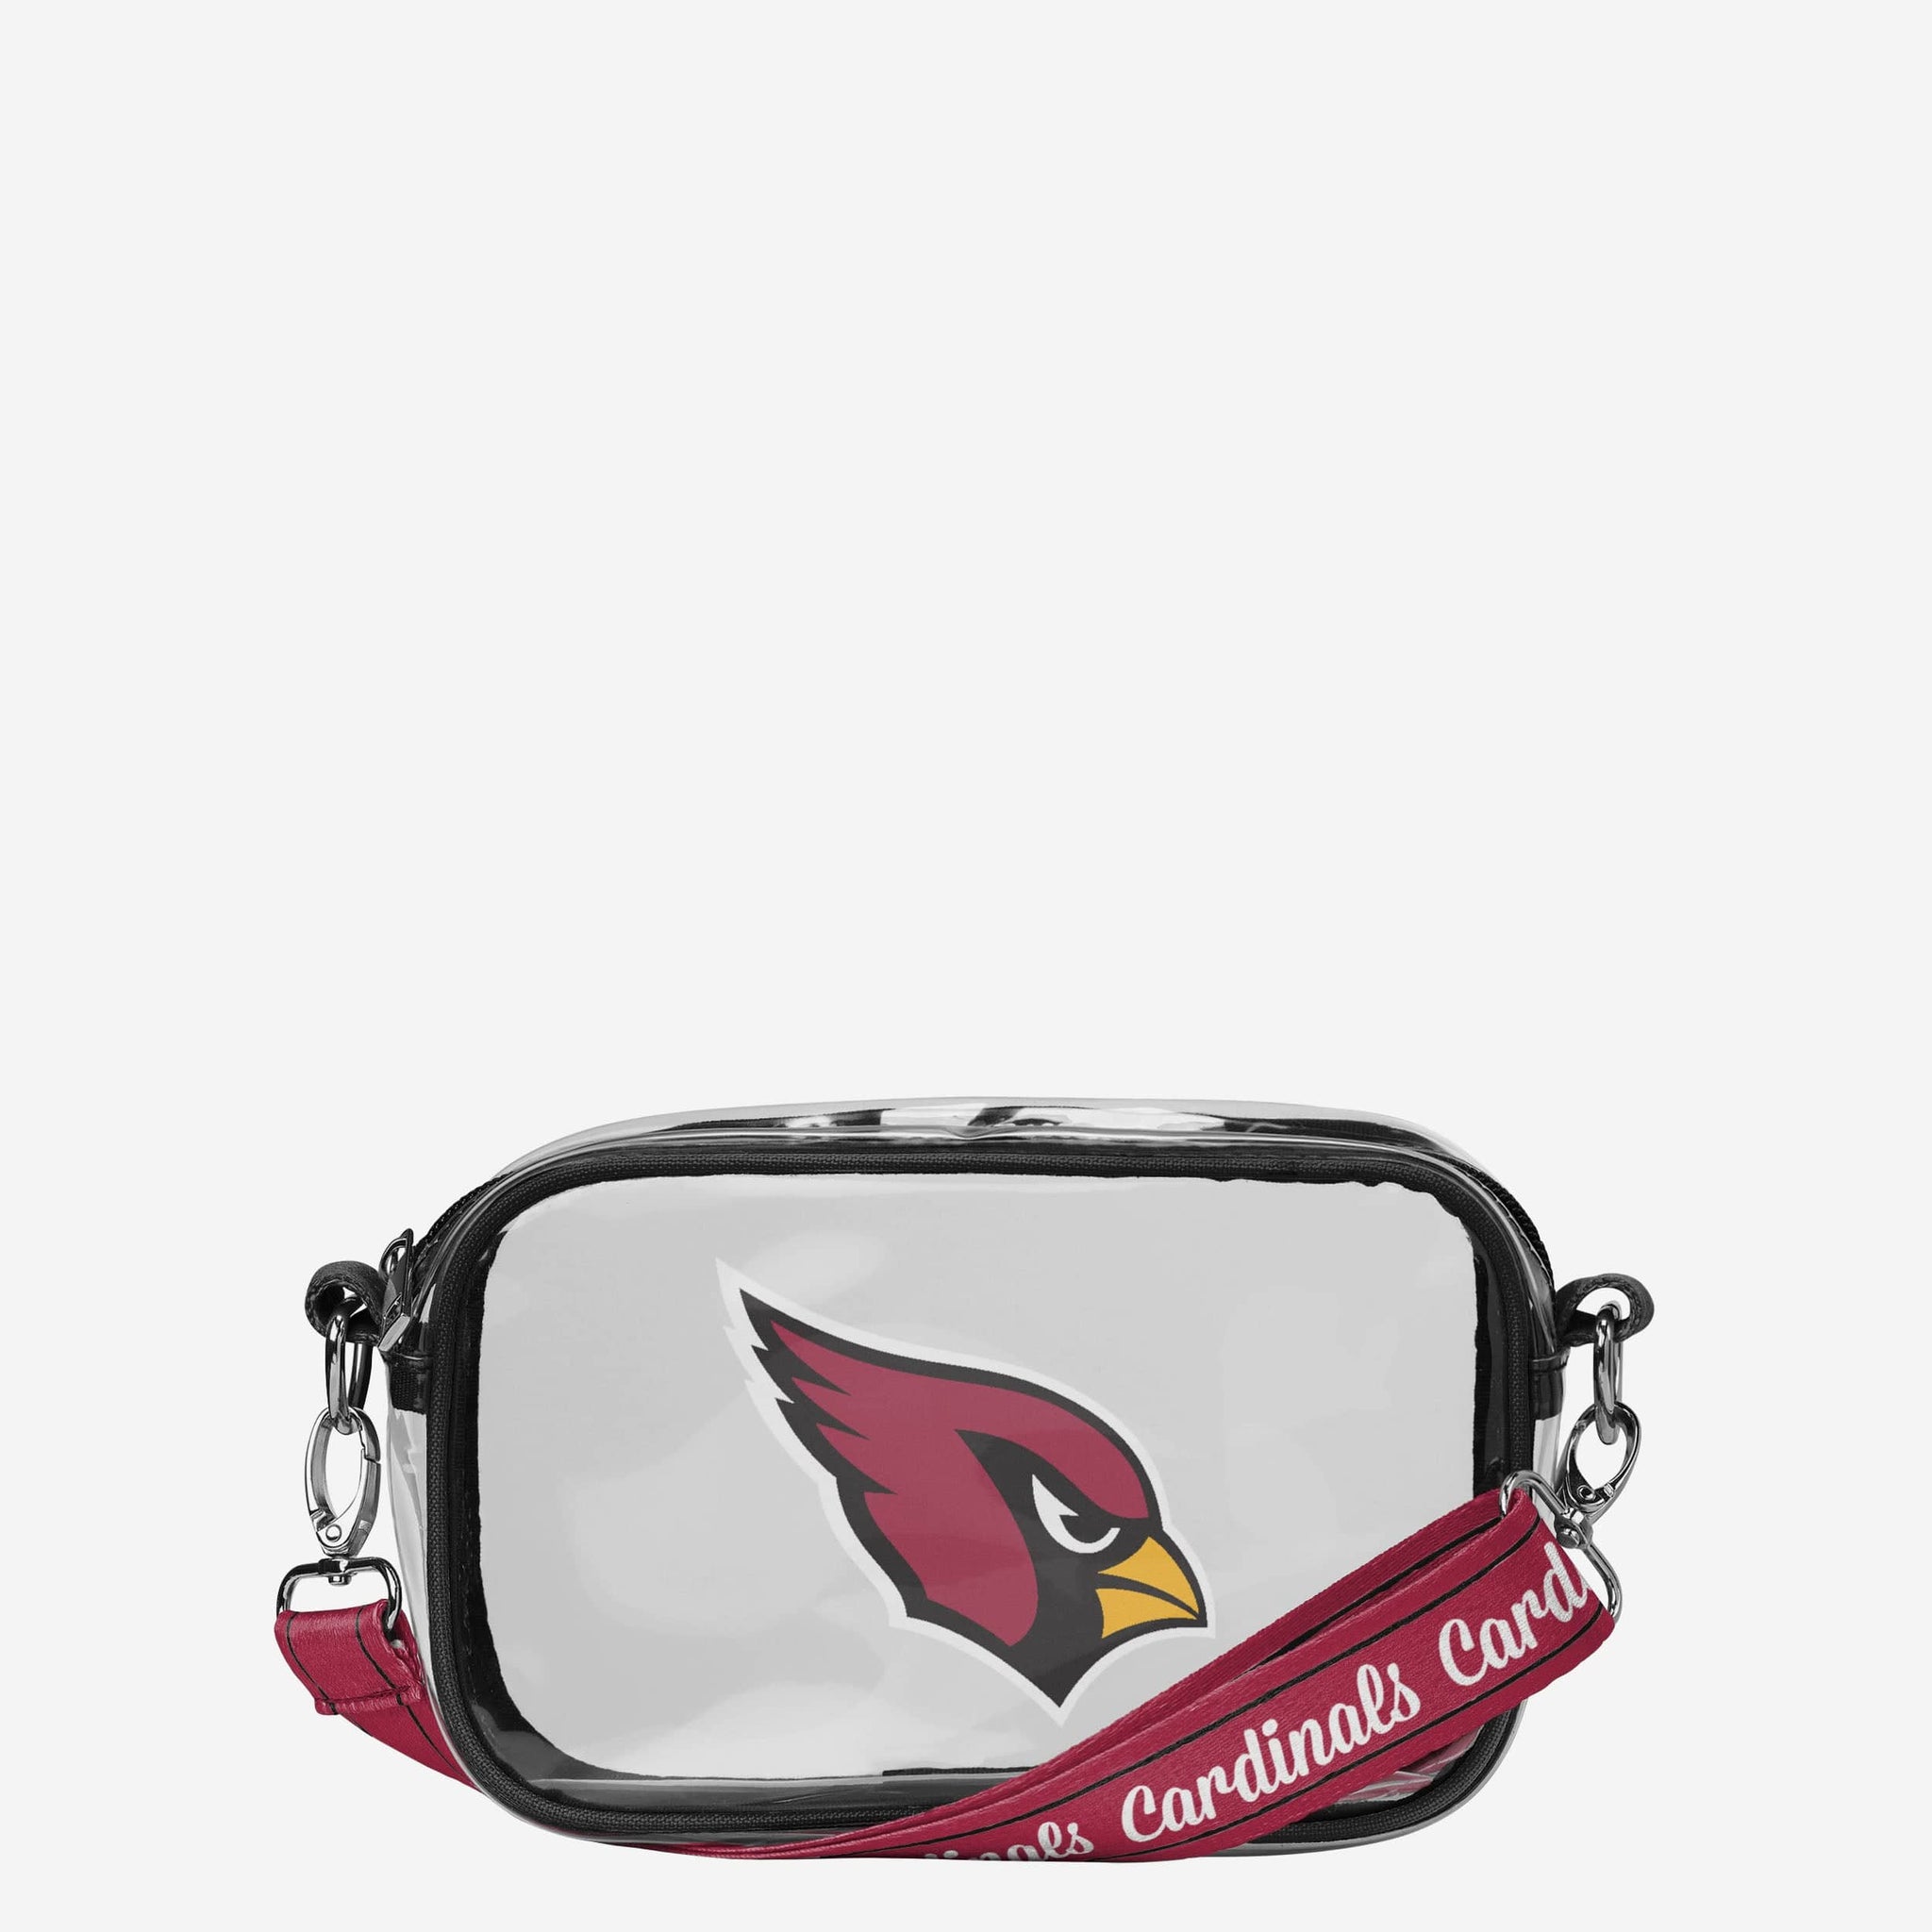 Officially Licensed NCAA Large Fanny Pack - Louisville Cardinals